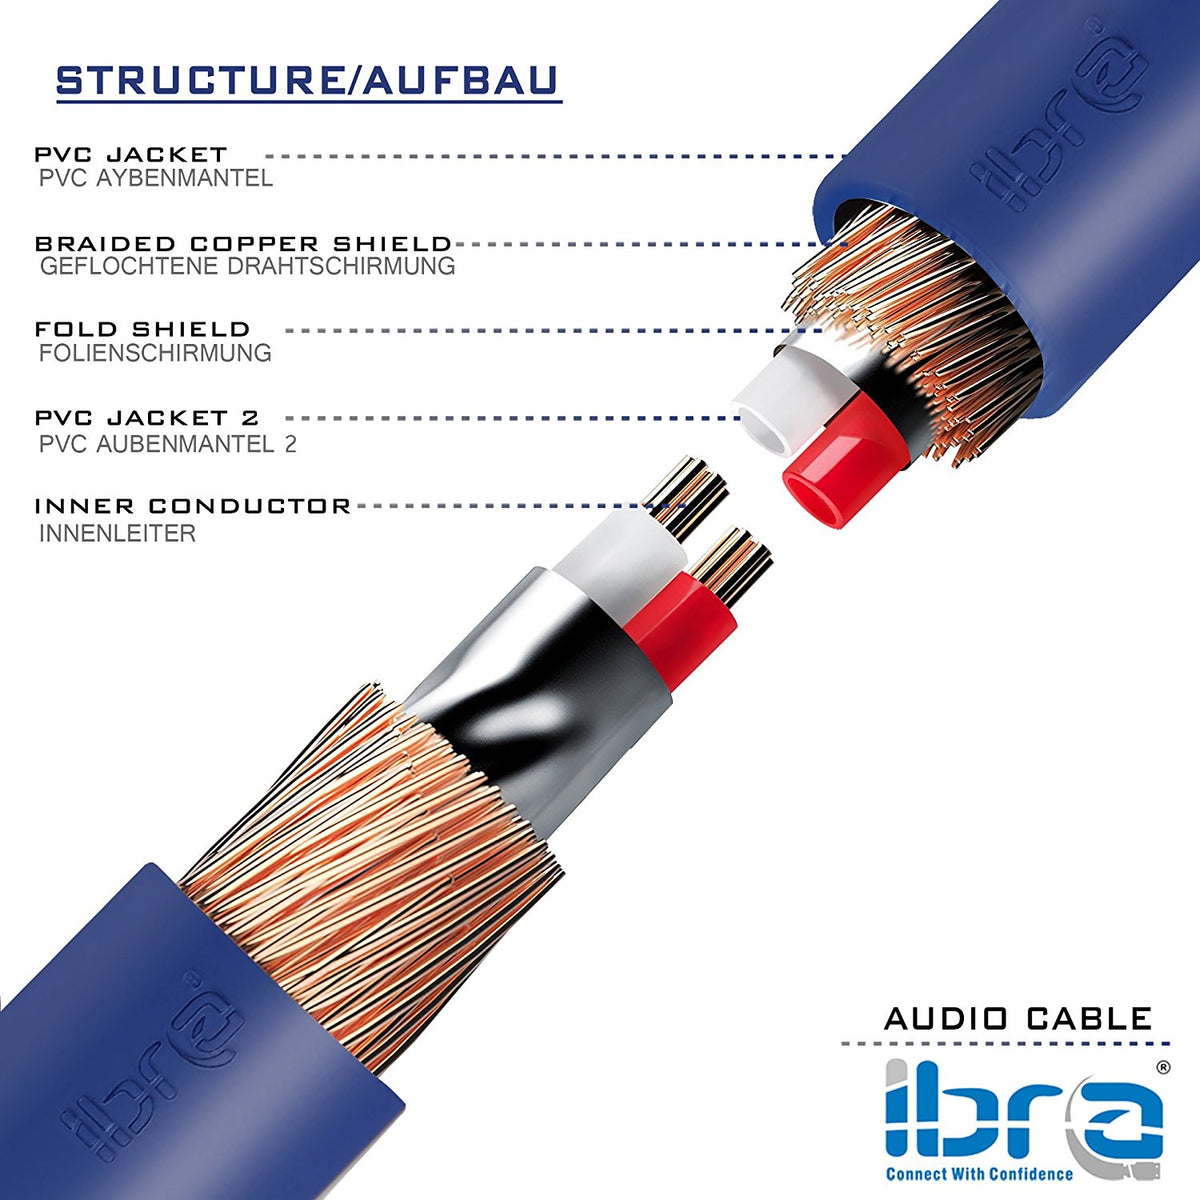 Aux Cable 2M 3.5mm Stereo Pro Auxiliary Audio Cable - for Beats Headphones Apple iPod iPhone iPad Samsung LG Smartphone MP3 Player Home / Car etc - IBRA Blue